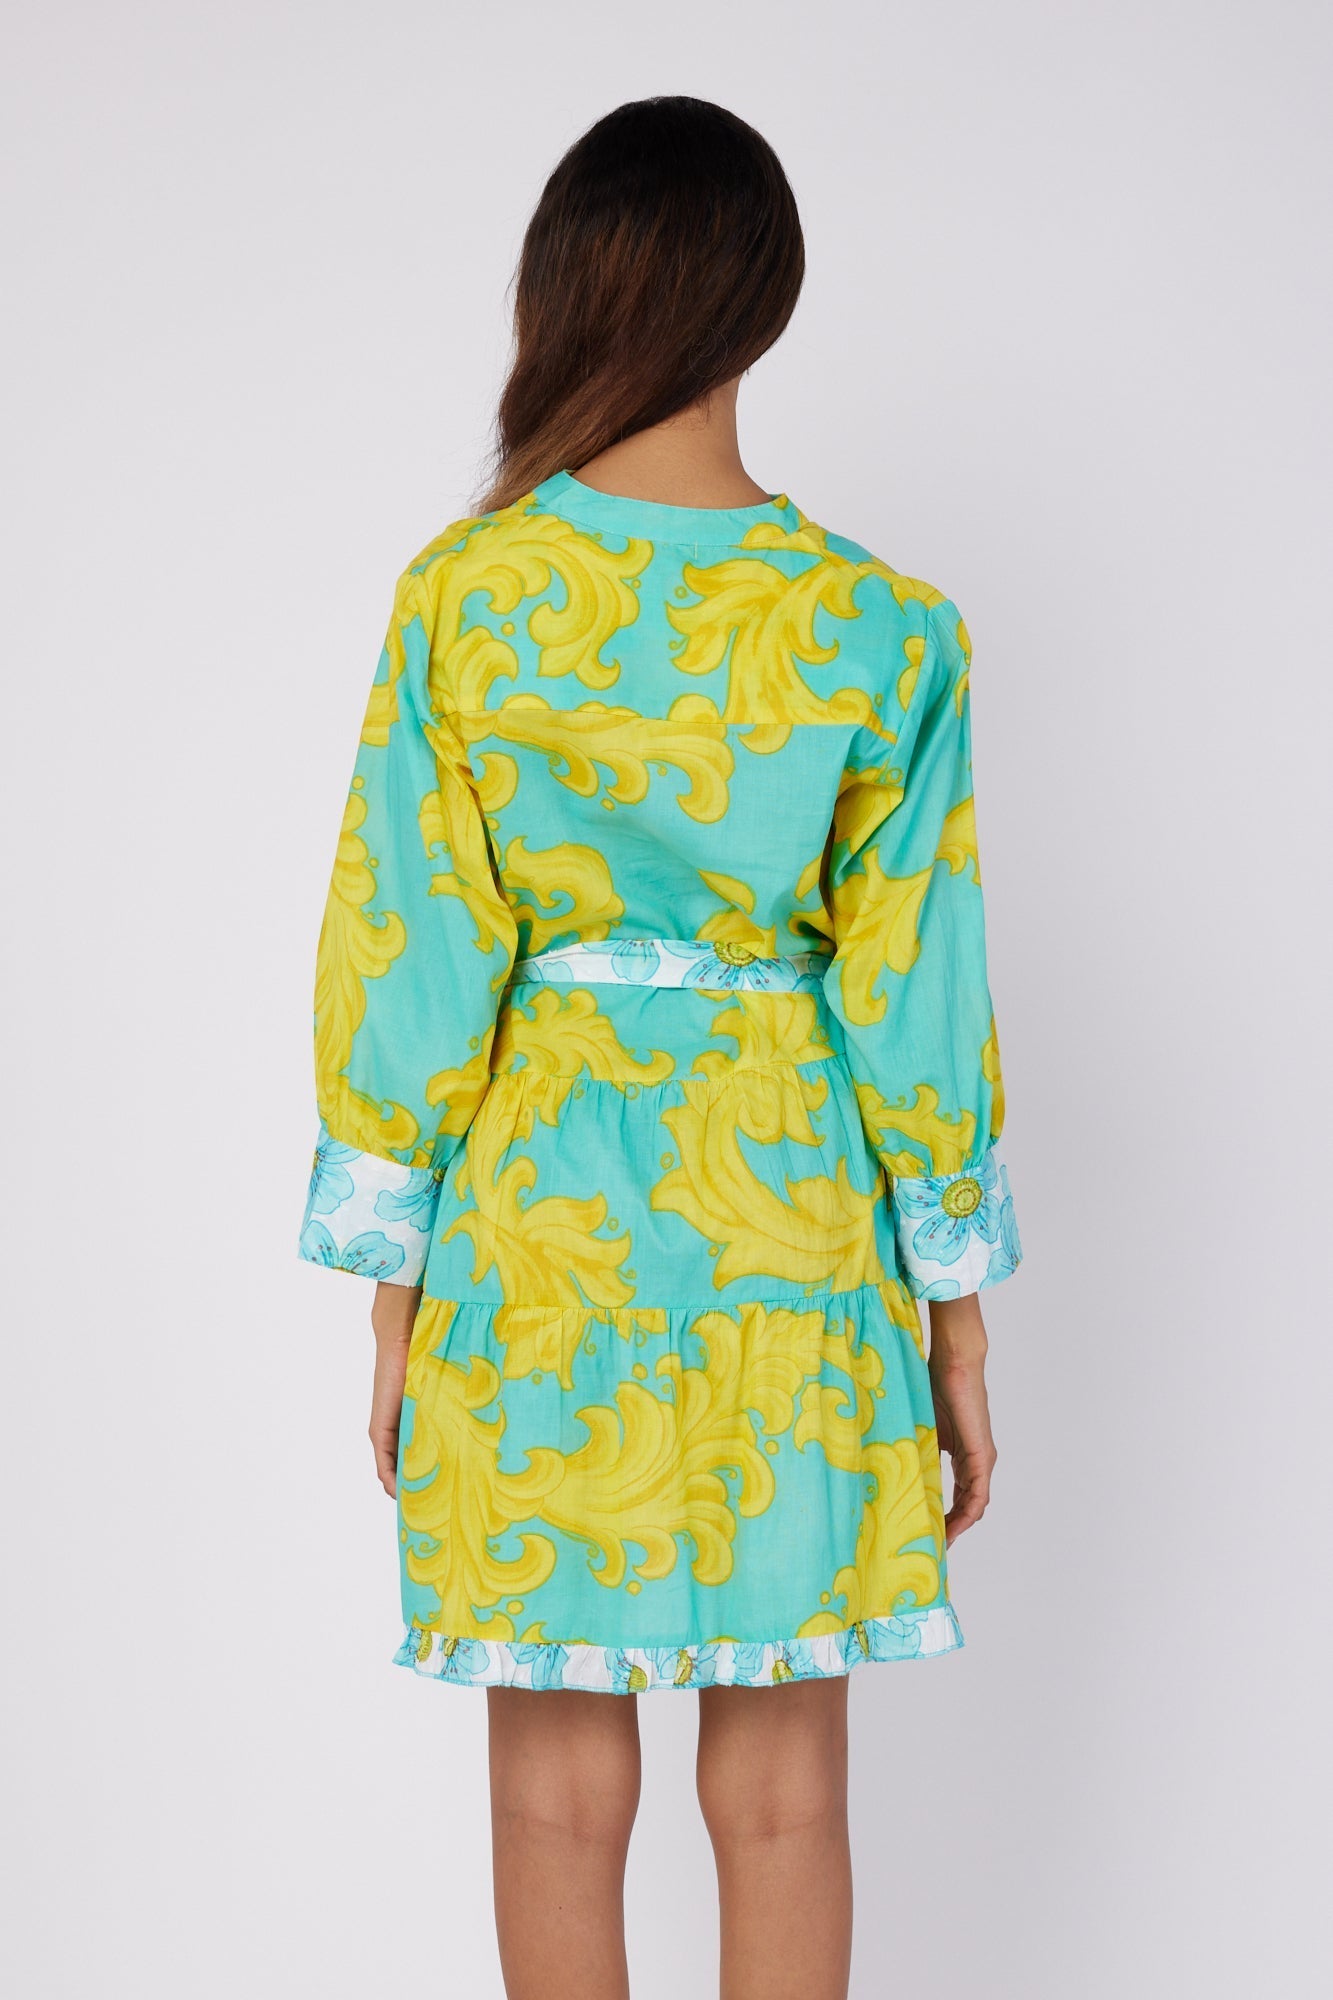 ModaPosa Alcee 3/4 Puff Sleeve Mini Dress with Detachable Belt in Golden Floral Combo . Discover women's resort dresses and lifestyle clothing inspired by the Mediterranean. Free worldwide shipping available!